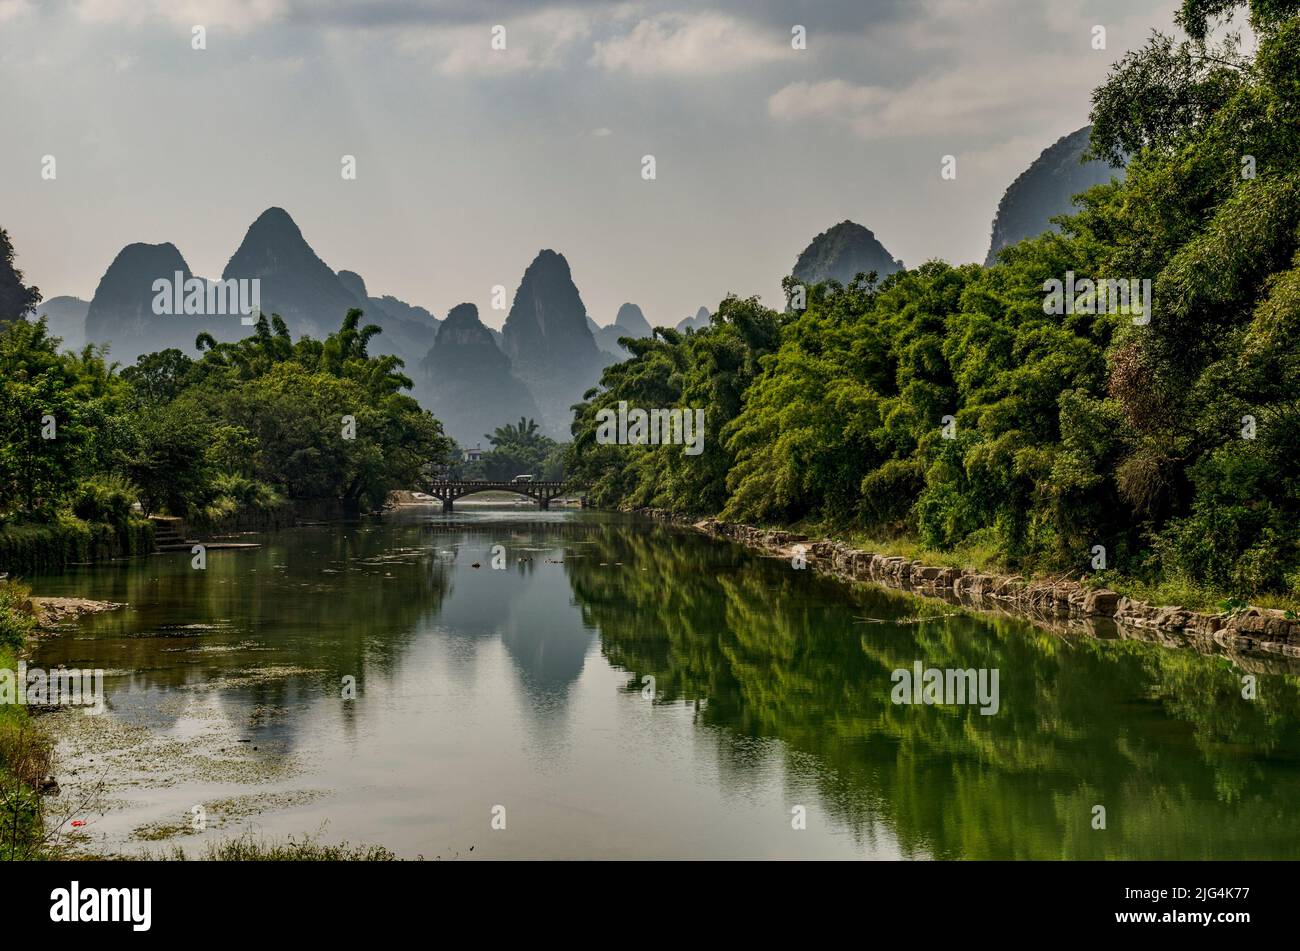 Karstic mountainous landscape in the vicinity of the Li River in Guilin, China. This landscape is typical of the area. Stock Photo